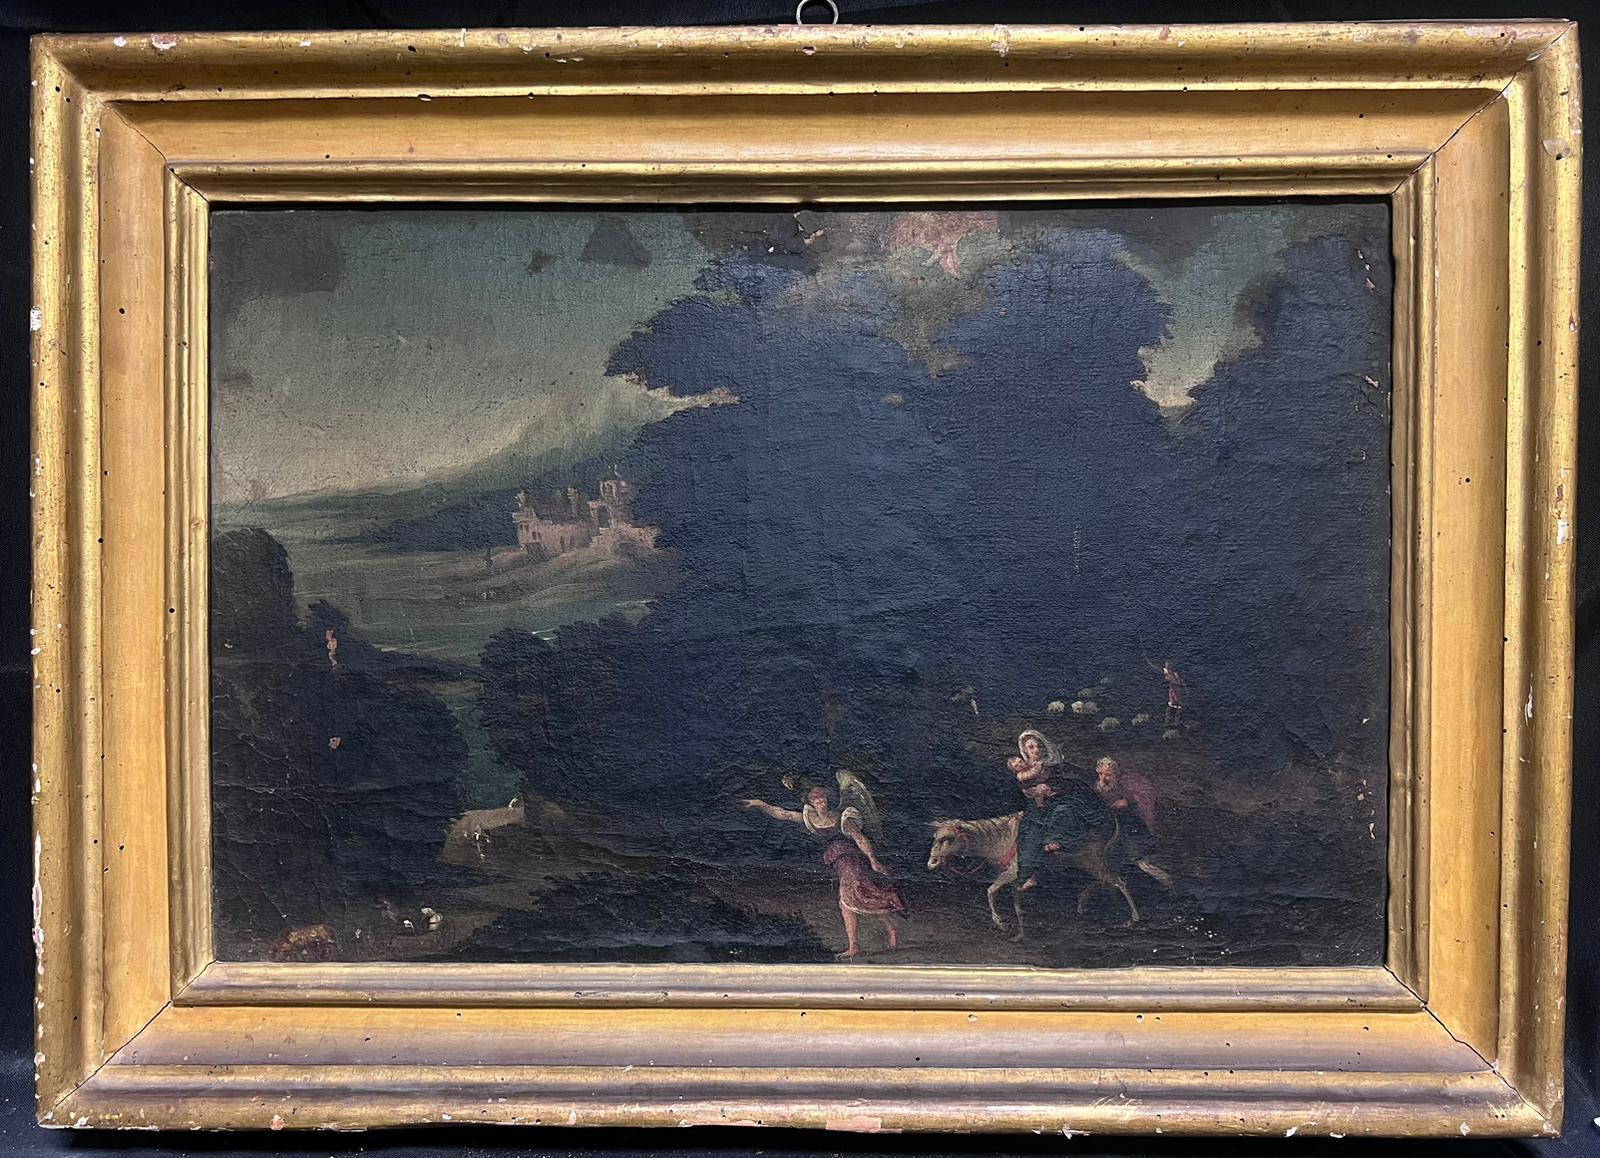 The Flight to Egypt
Italian School, 18th century 
oil on canvas, framed
framed: 19.75 x 27 inches
canvas: 13.5 x 21 inches
provenance: private collection, France
condition: the painting requires restoration and is very tatty, though can fairly be